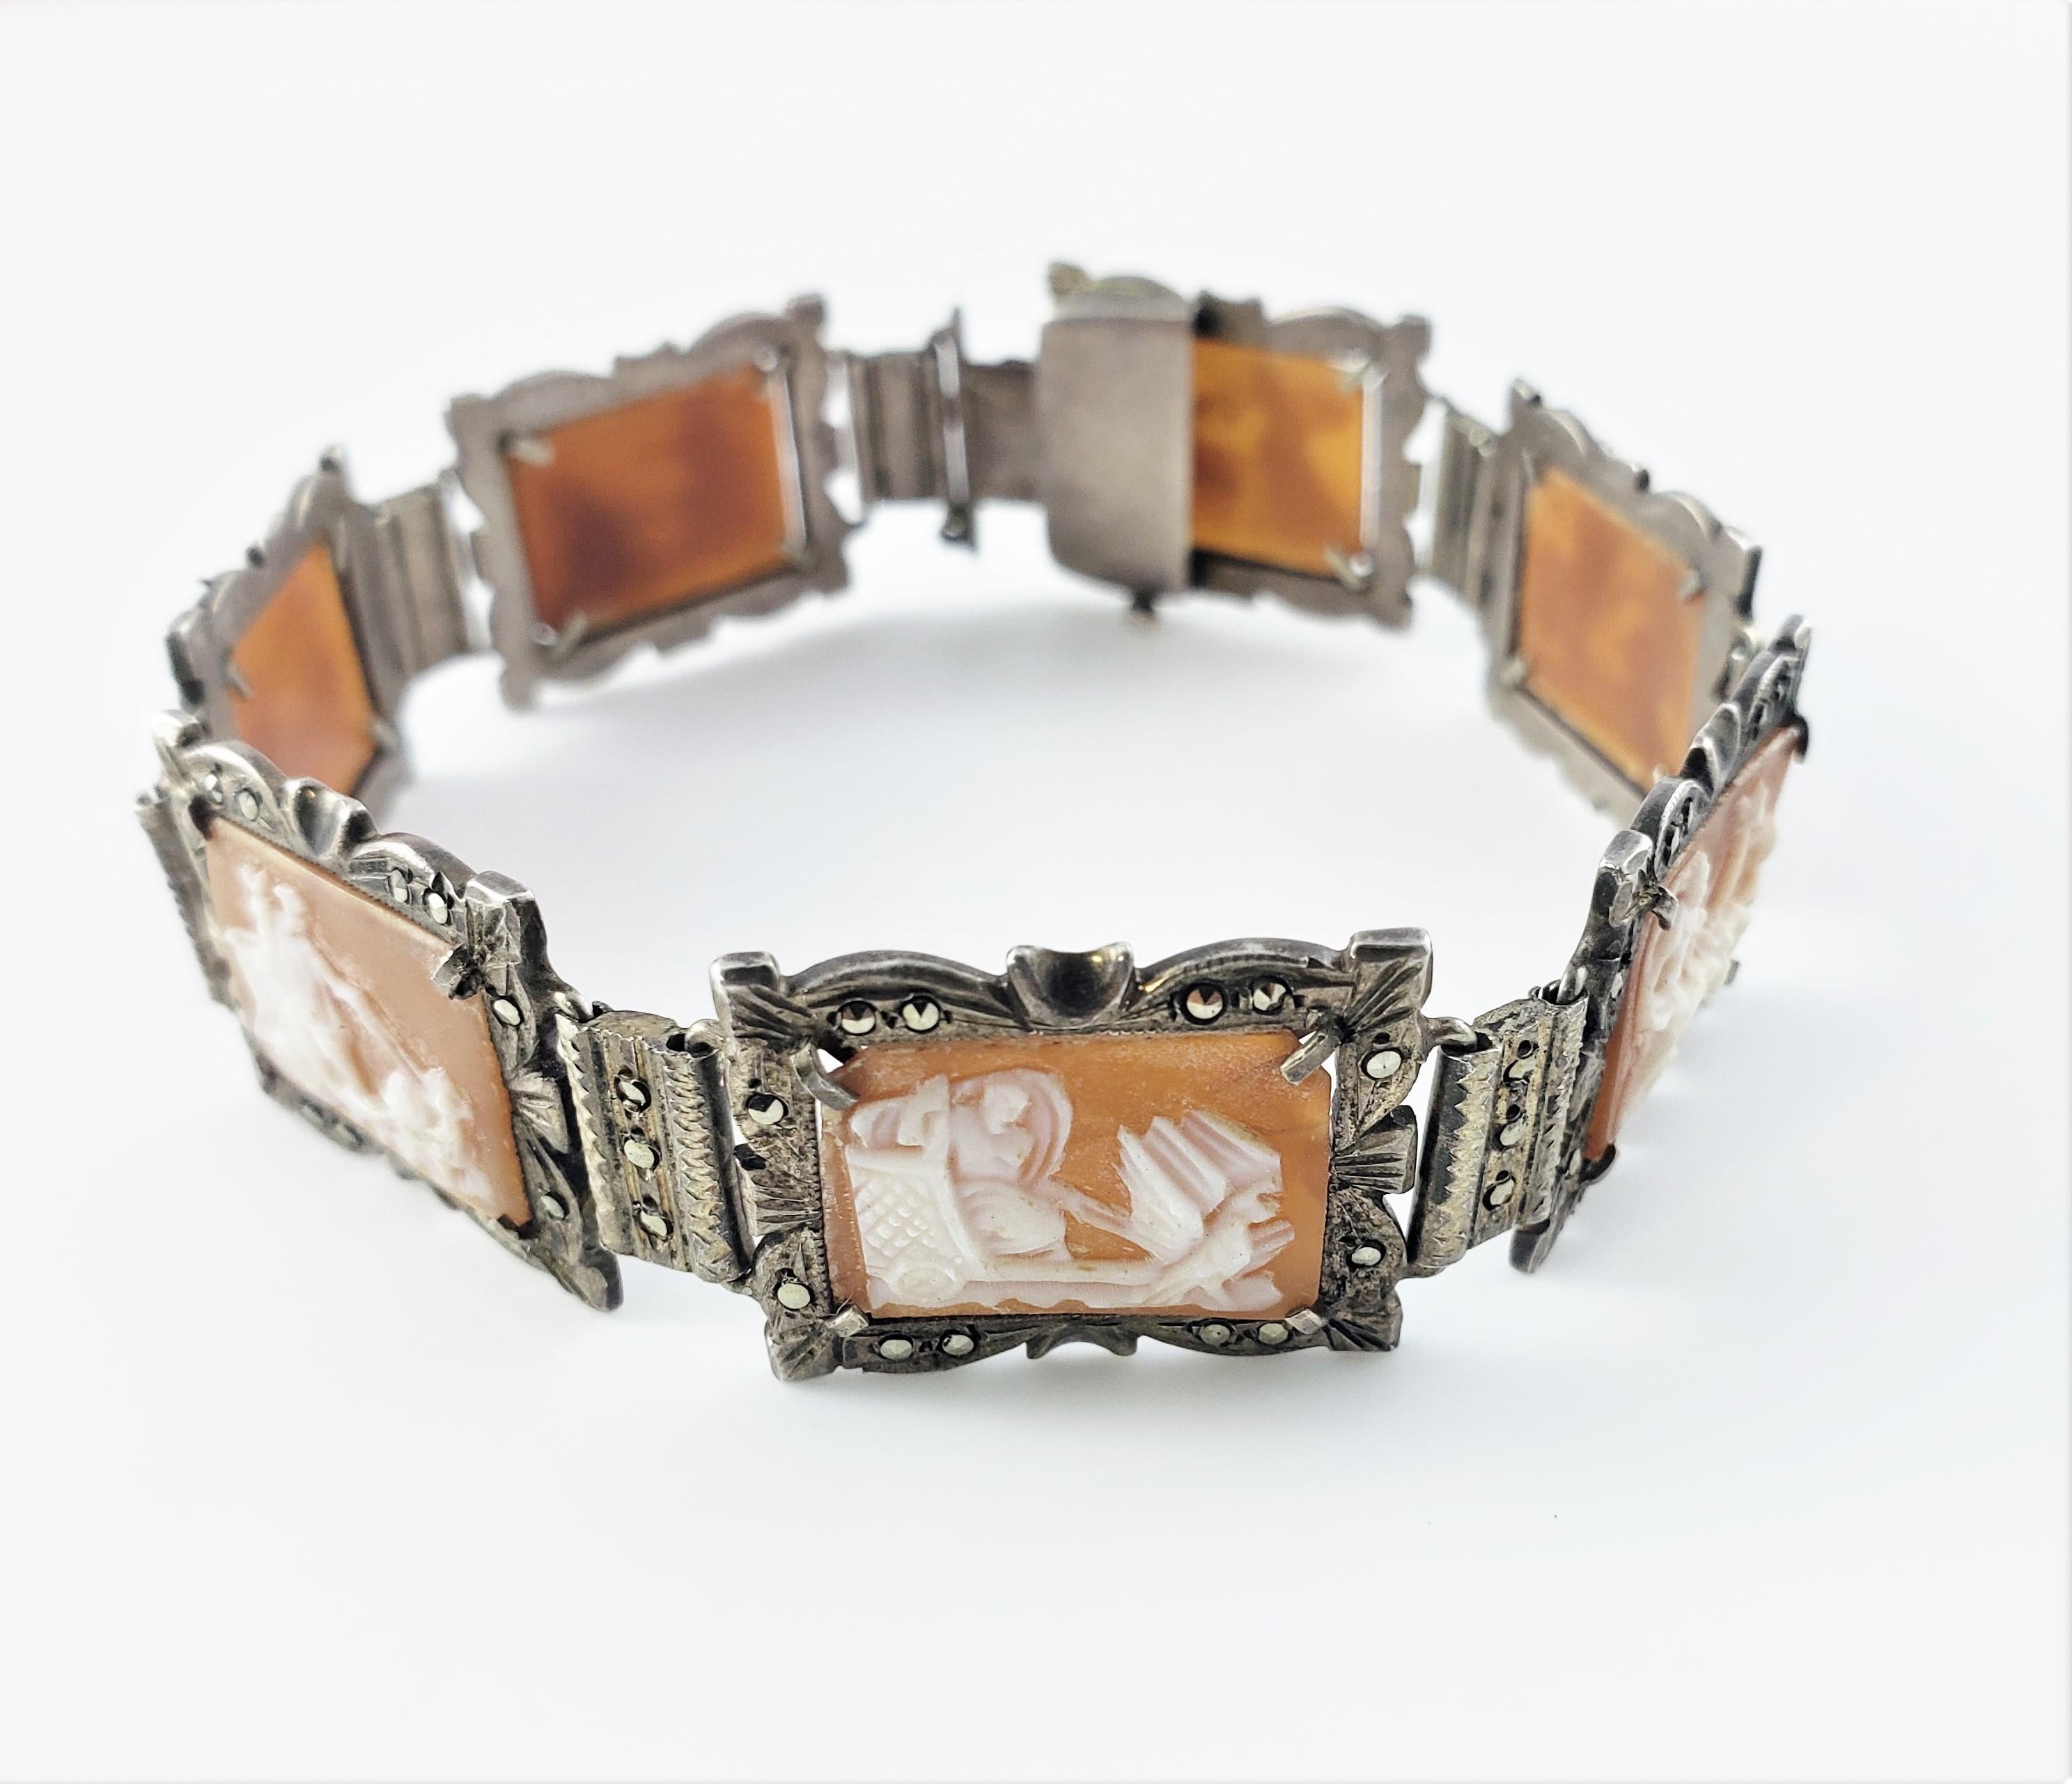 Vintage 800 Silver Marcasite Abalone Panel Link Cameo Bracelet-

This lovely silver cameo bracelet features seven panels each featuring a chariot scene crafted in beautifully detailed abalone and marcasite.

Size: 7.75